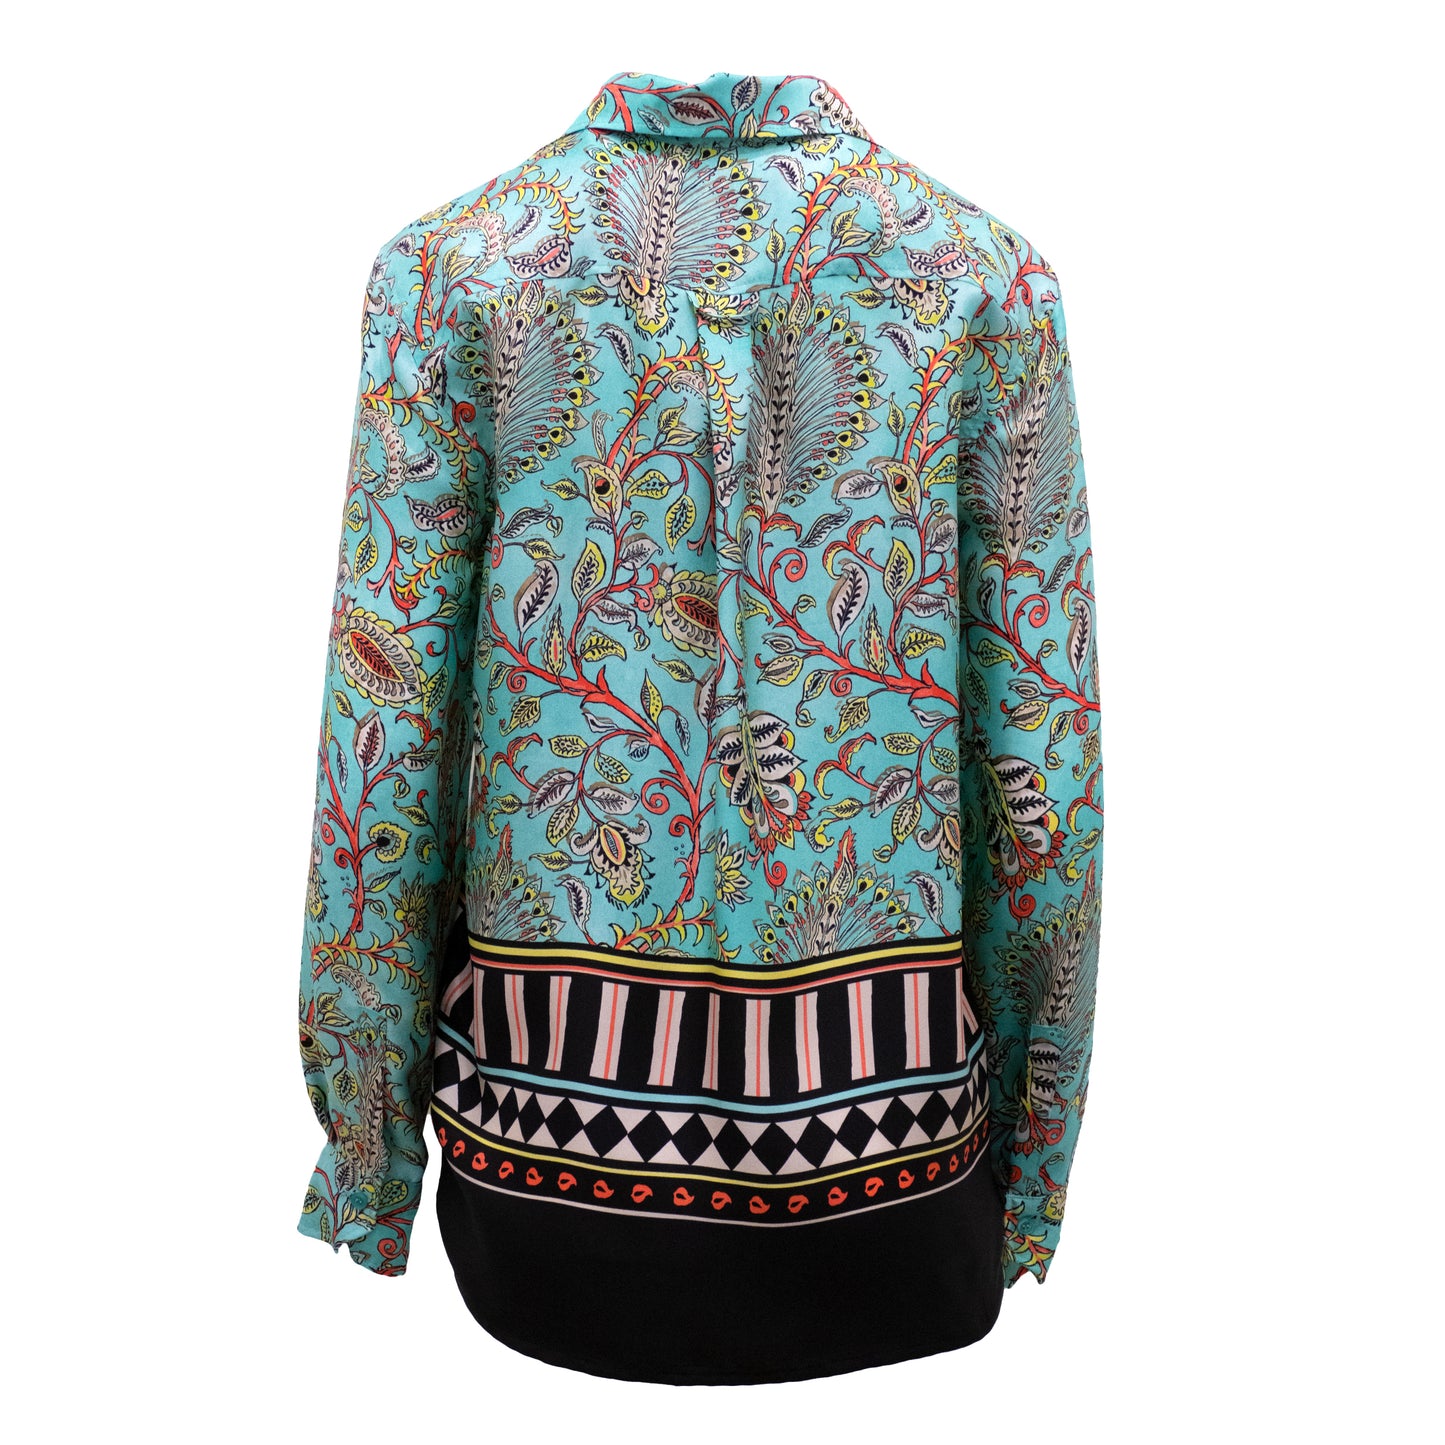 Teal & Pink Paisley Blouse